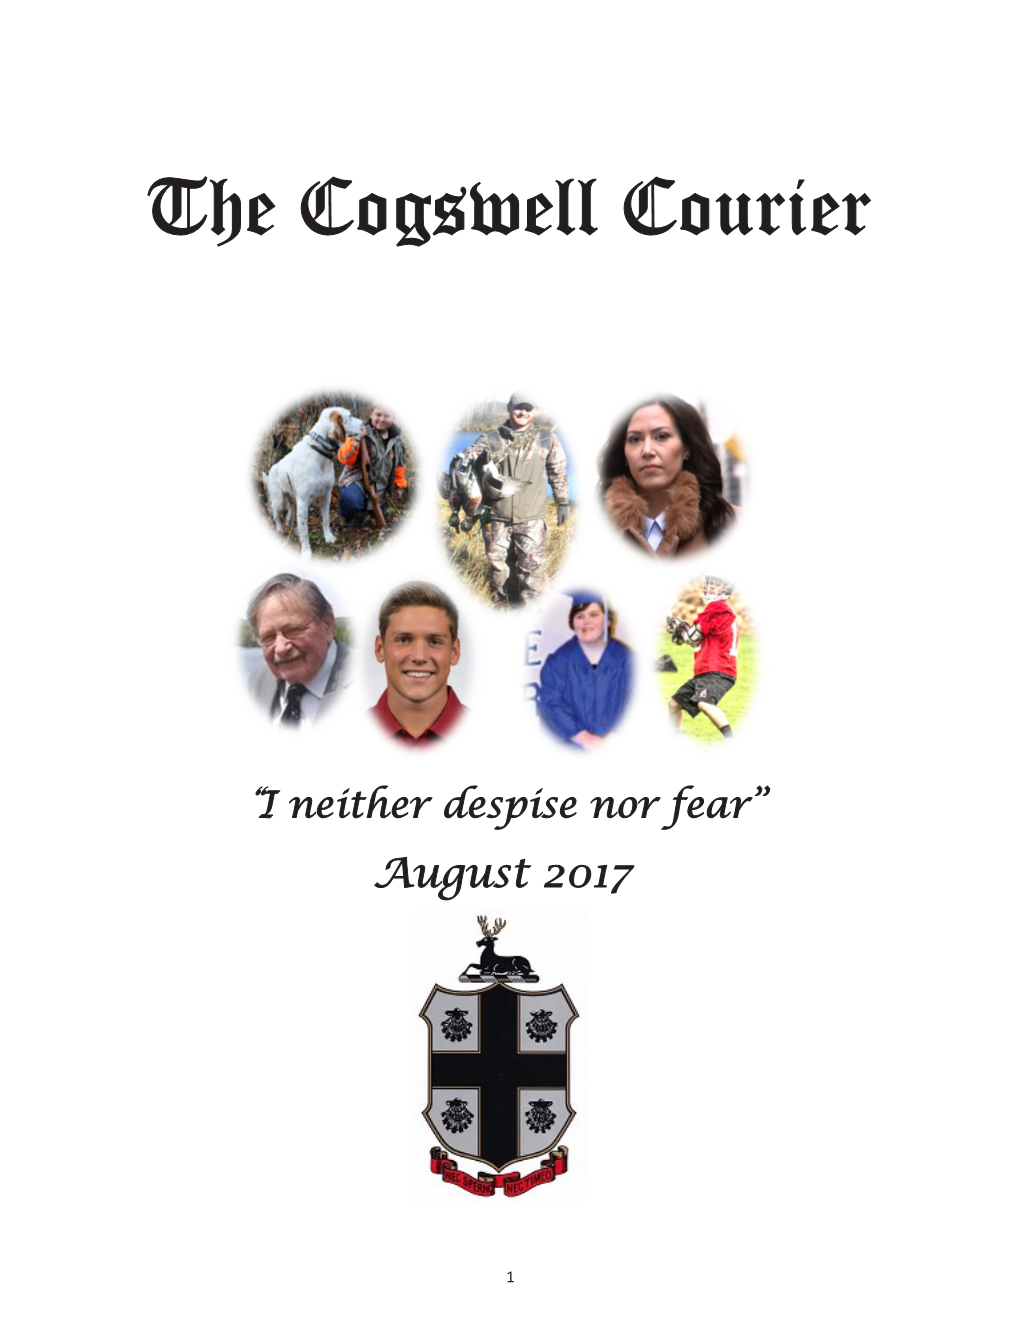 The Cogswell Courier